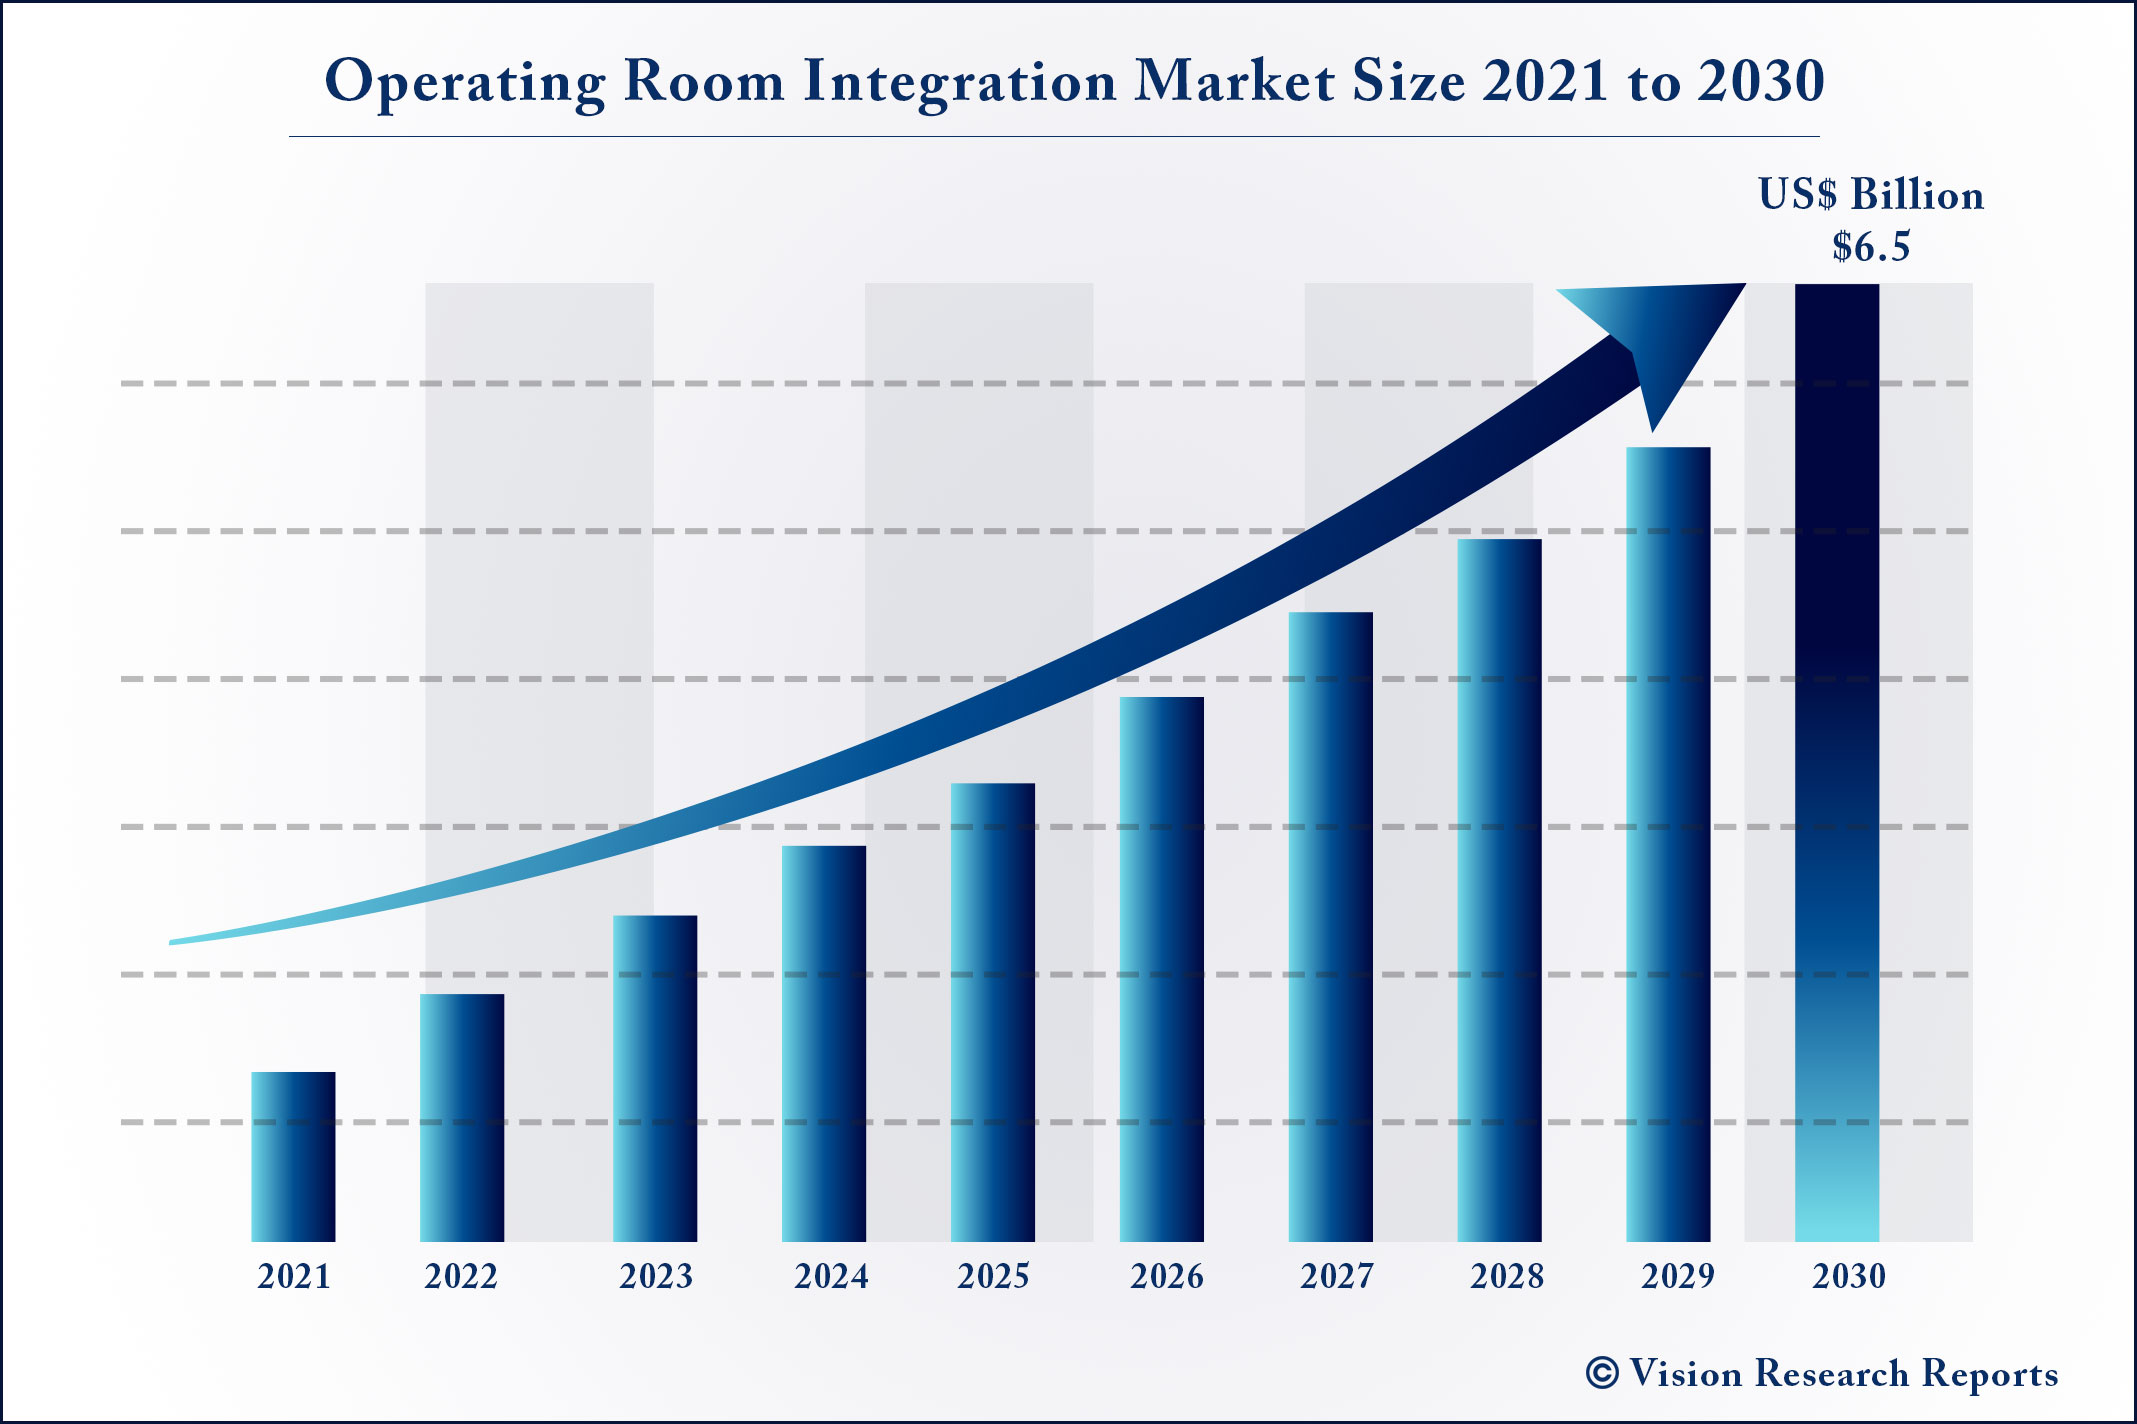 Operating Room Integration Market Size 2021 to 2030